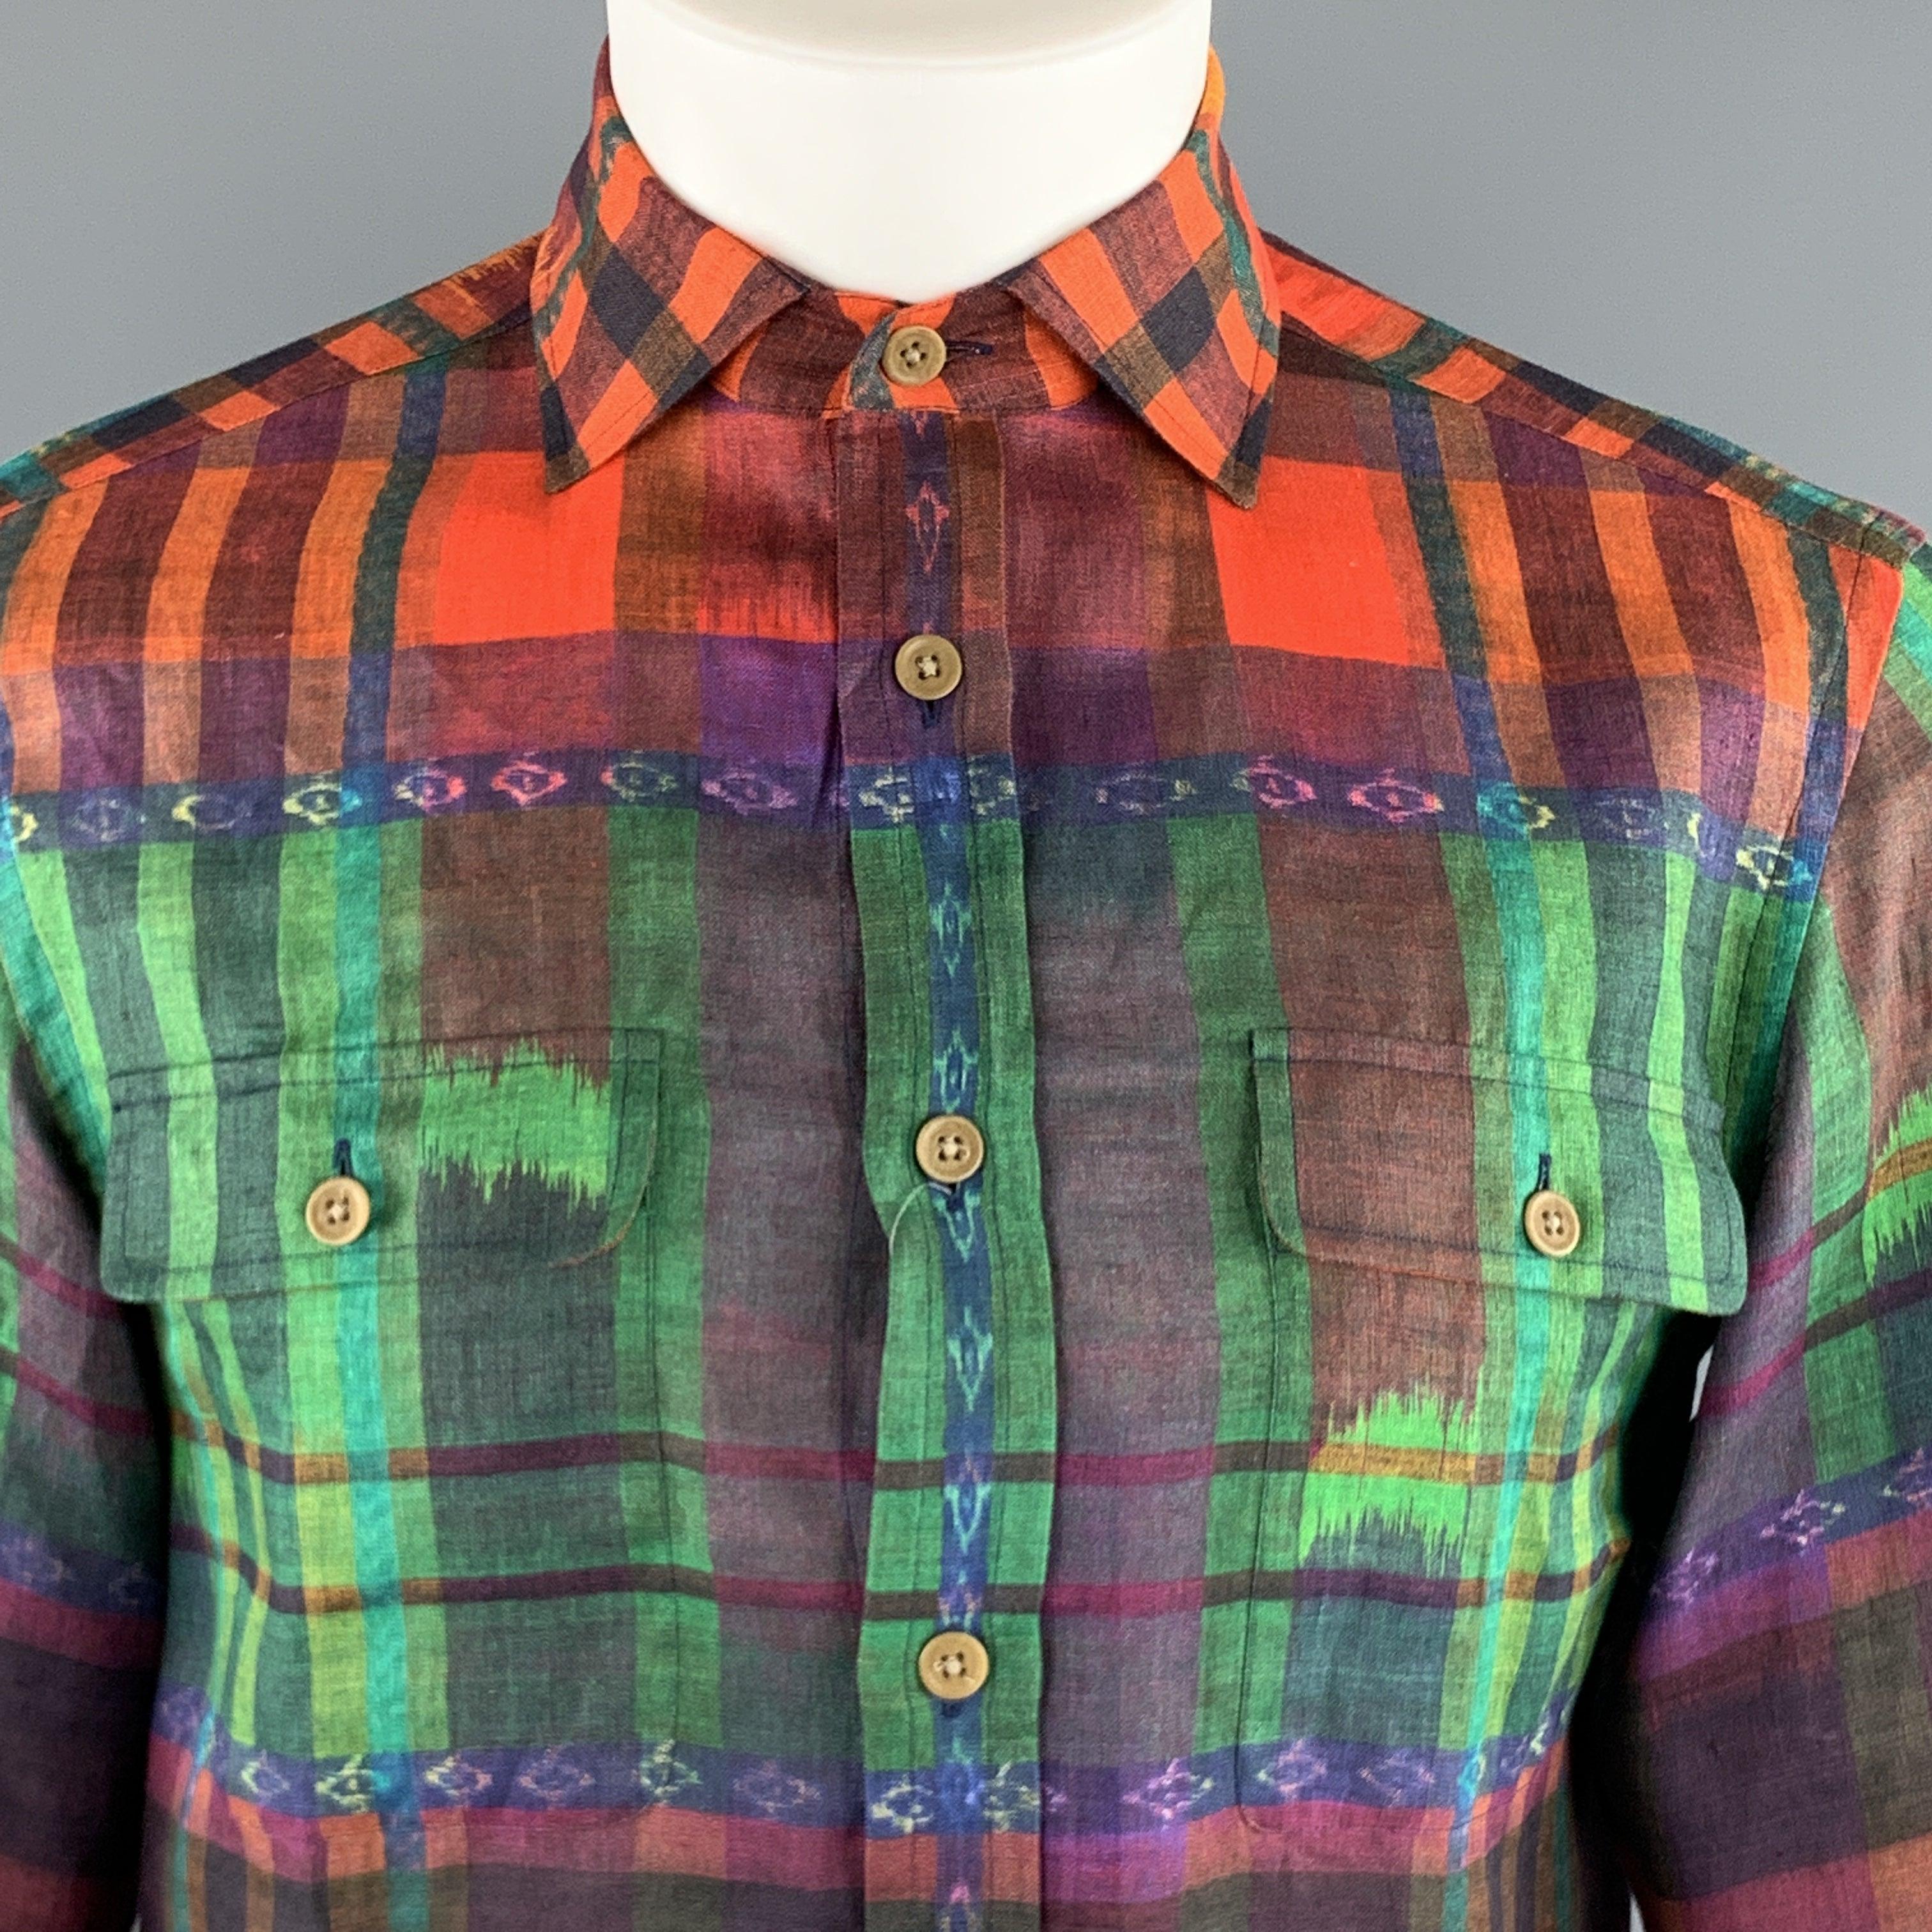 RALPH LAUREN PURPLE LABEL shirt comes in multi-color plaid linen with a spread collar and patch flap pockets. Made in Italy.New with Tags. 

Marked:   S 

Measurements: 
 
Shoulder: 17 inches Chest:
39 inches Sleeve:
25.5 inches Length: 28 inches 
 